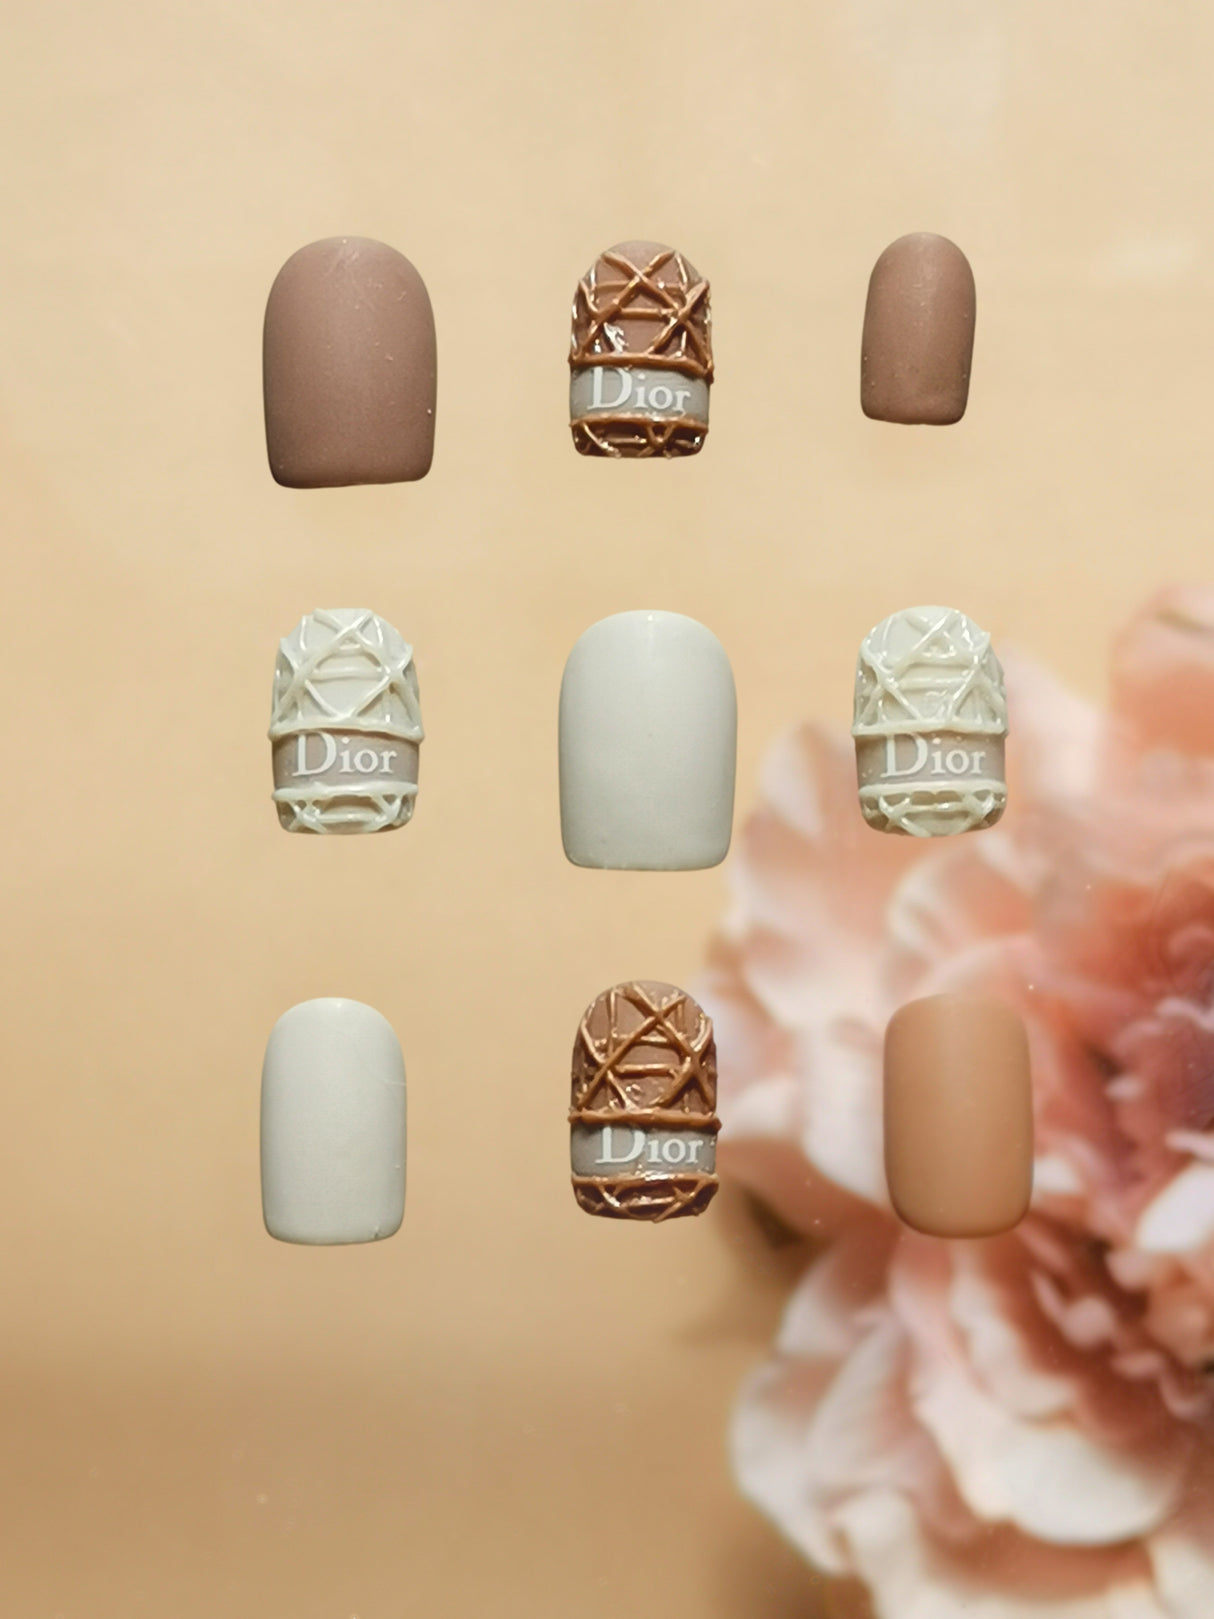 These Dior nails are perfect for luxury-themed nail art, with a neutral color palette and matte finish suitable for formal events or high-end fashion shows.